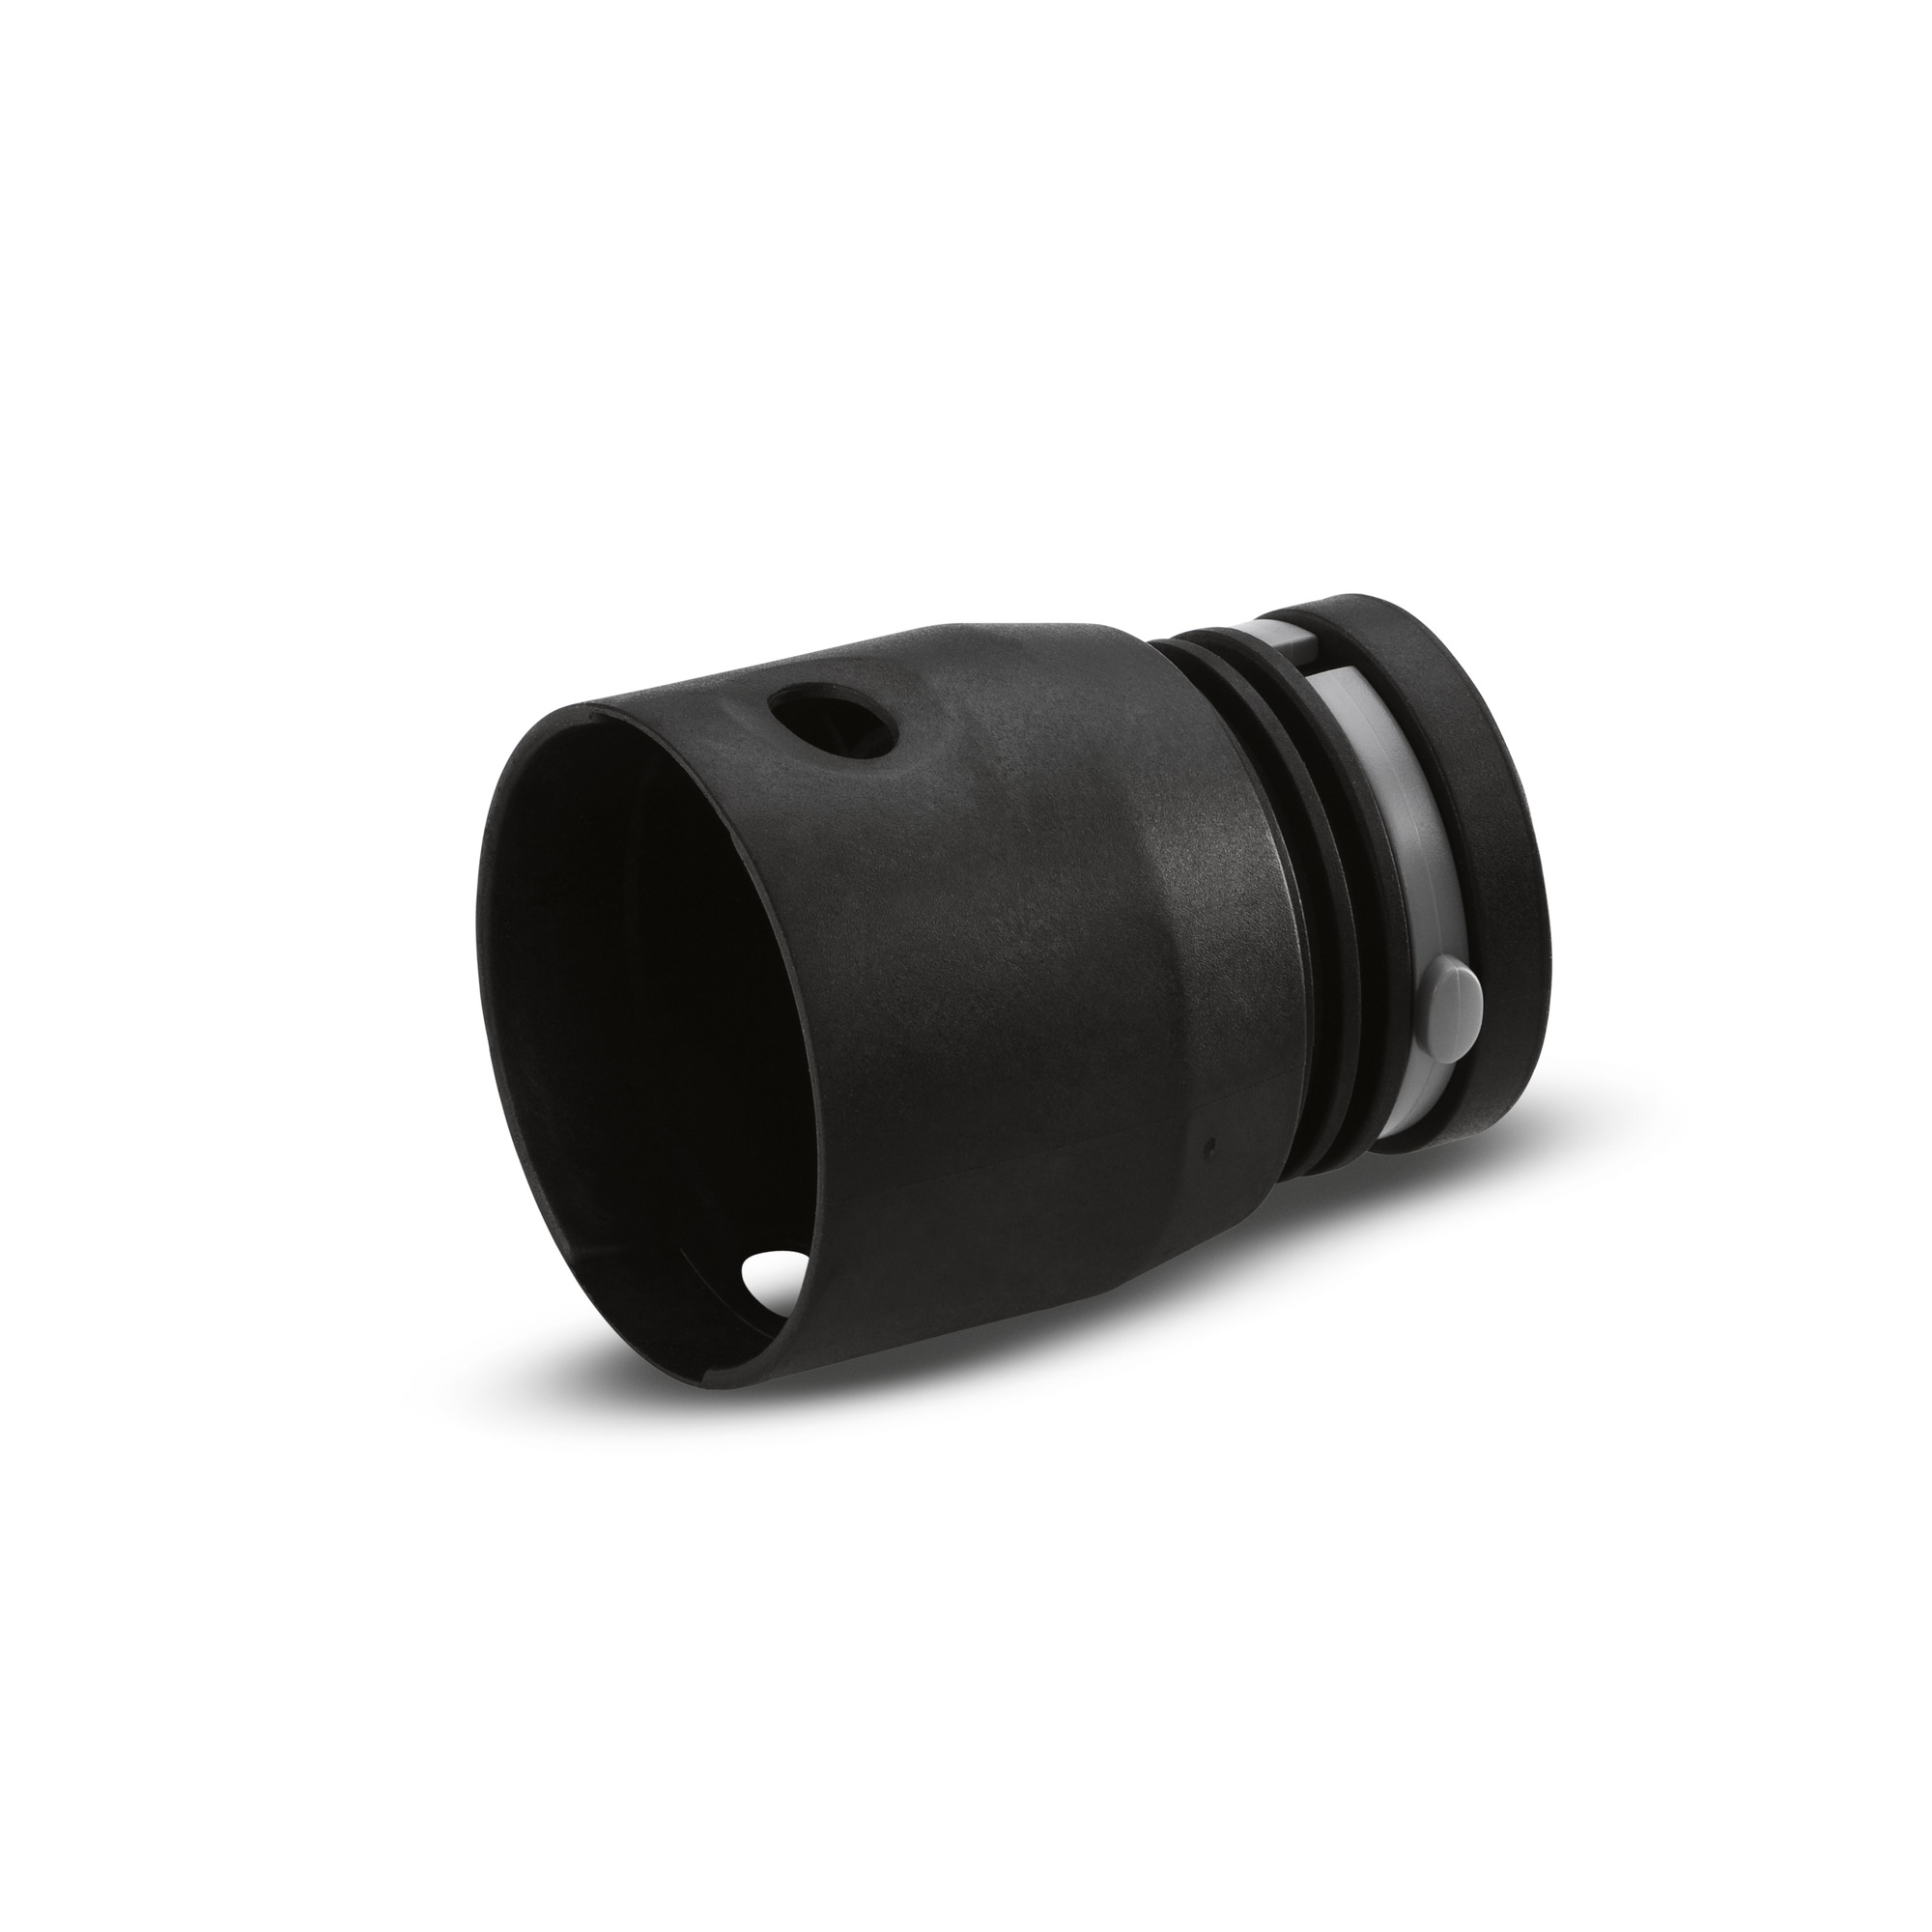 Kaercher NT reduction bushing with clip system for DN 40 suction hoses on accessory DN 35